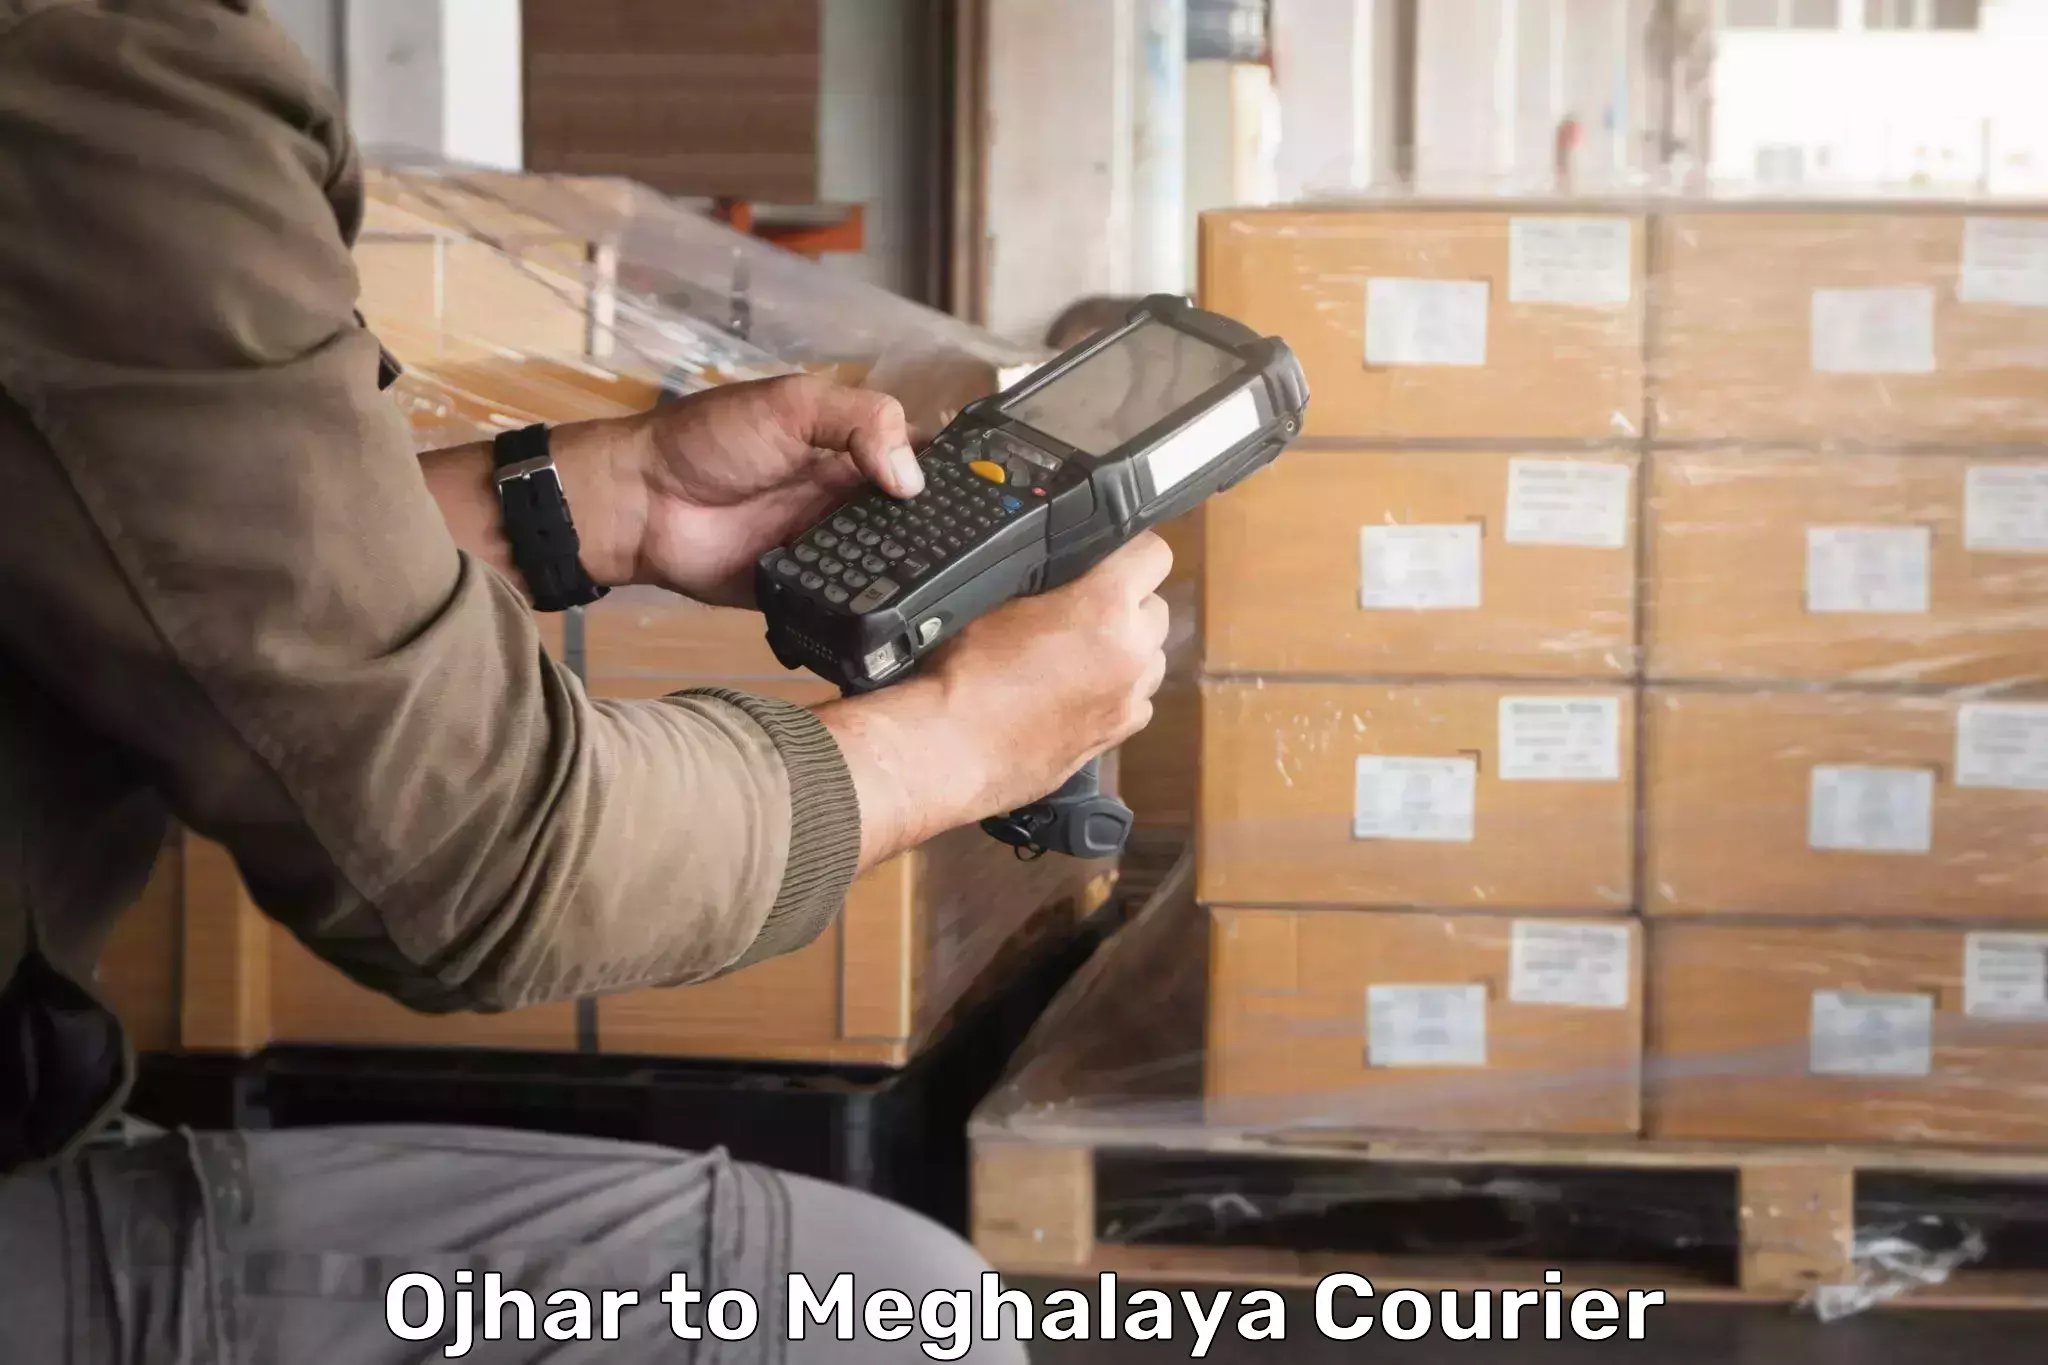 Automated parcel services Ojhar to Shillong